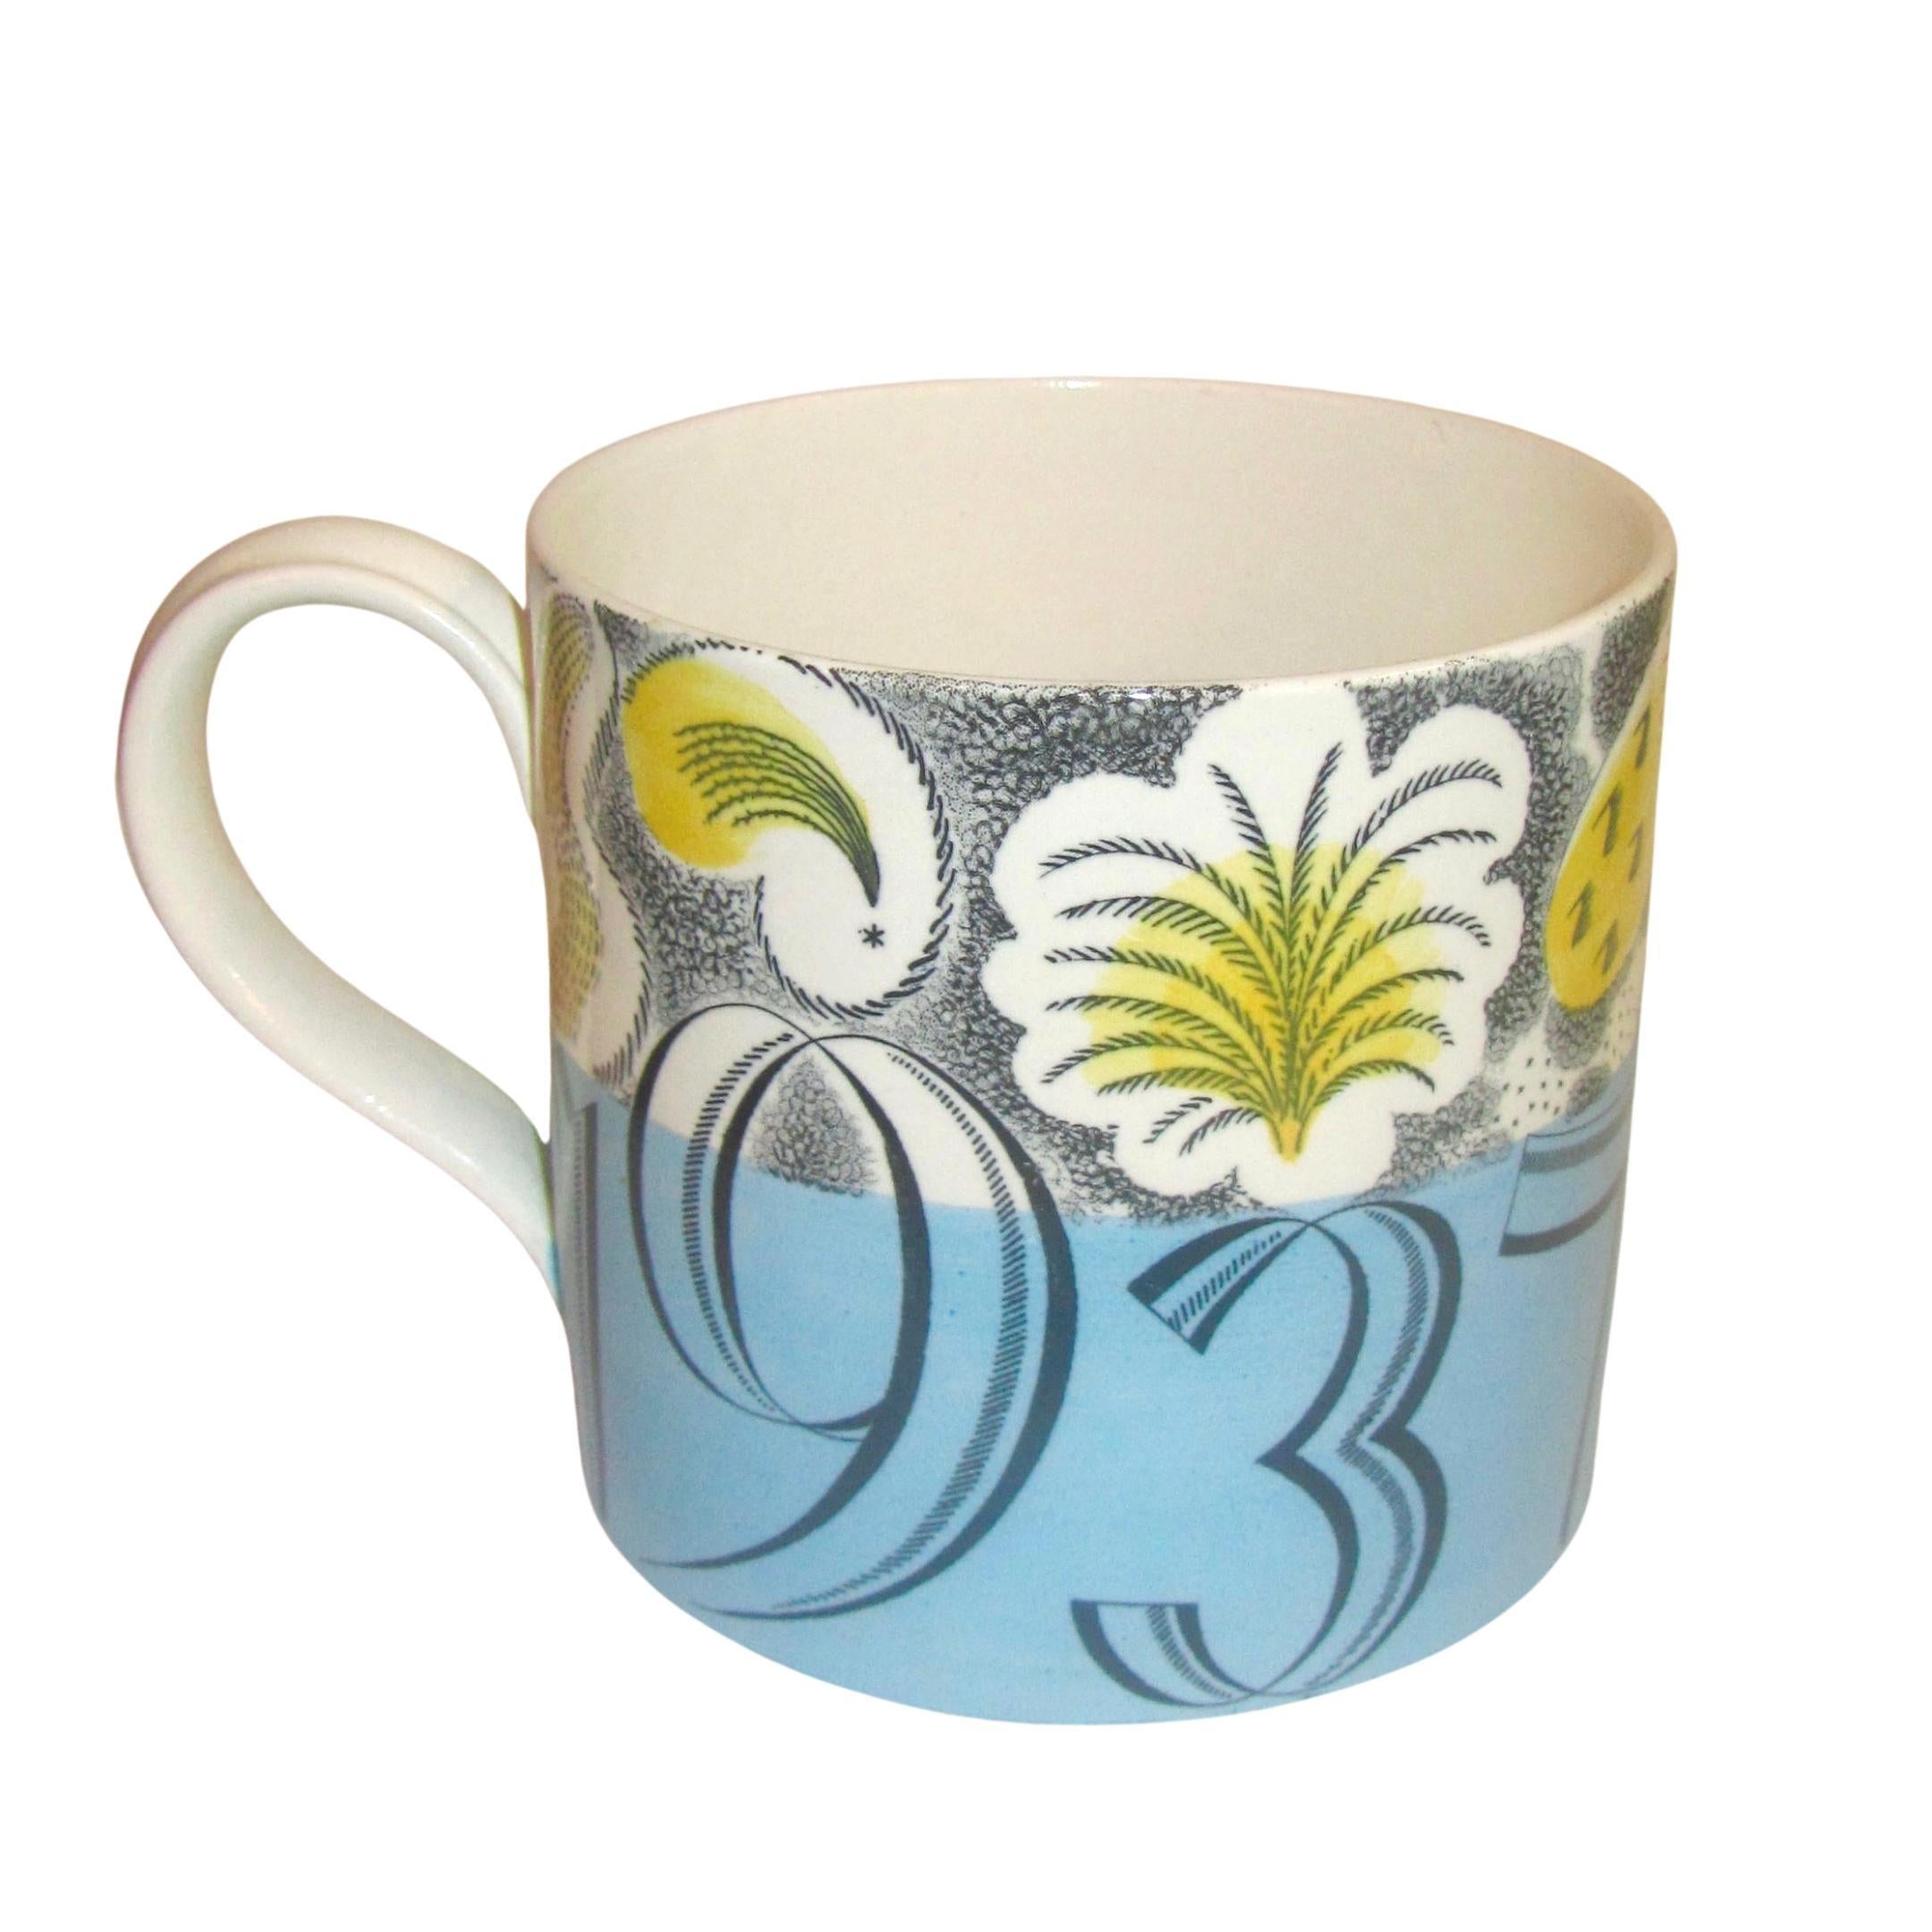 A Wedgwood mug commemorating the coronation of King George VI and Queen Elizabeth, 1937, designed by Eric Ravilious, decorated with fireworks above a dated blue band, impressed, black printed and painted marks to base
Measures: Height 10 cm